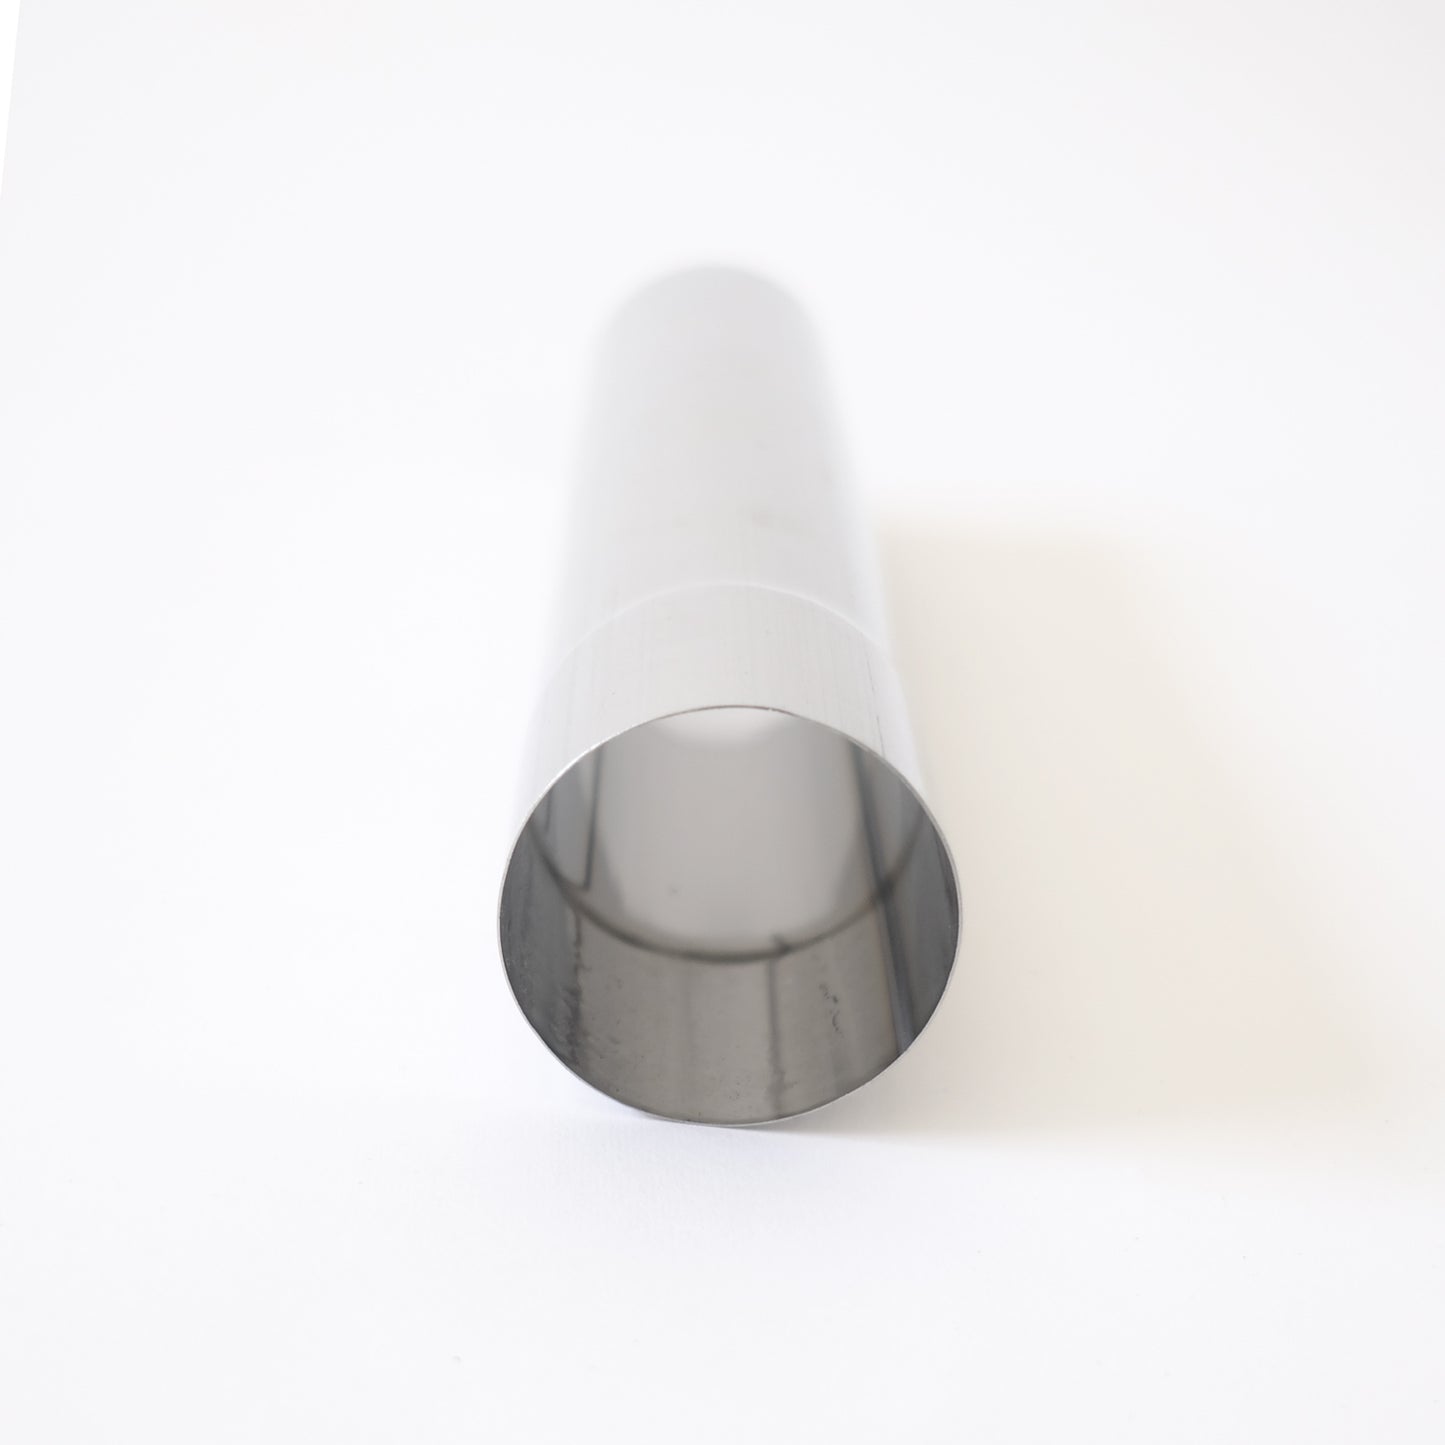 Nomad Stainless Steel Flue Section